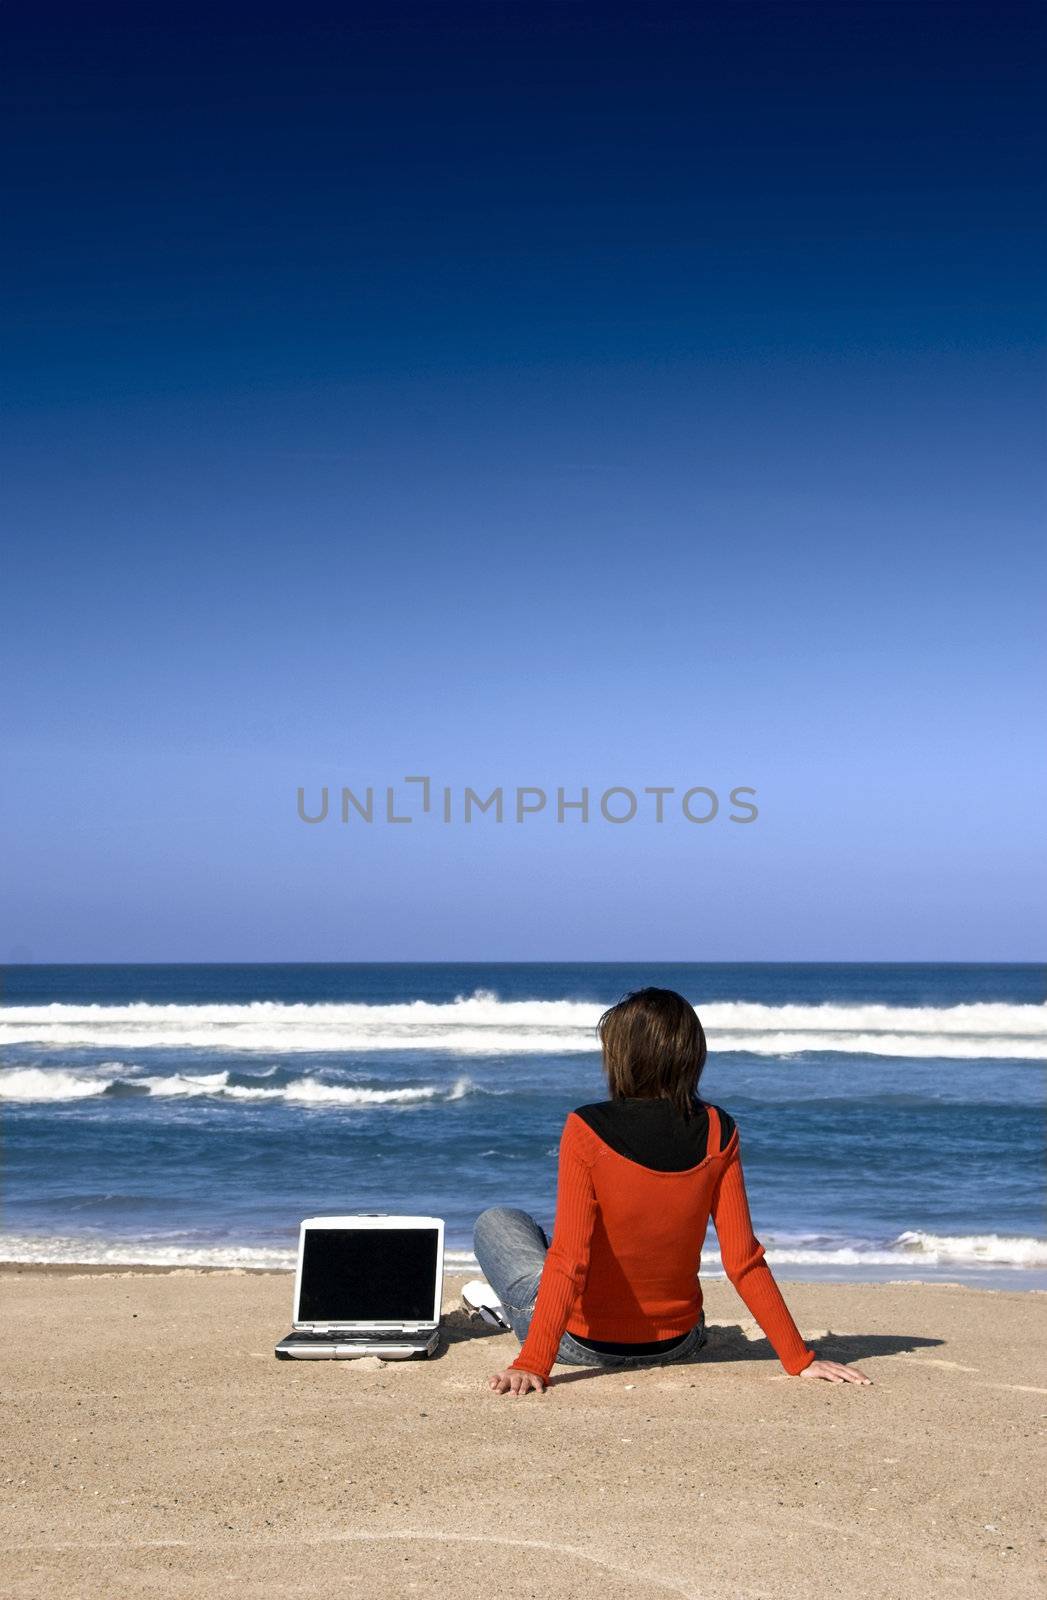 Woman working with a laptop on the beach